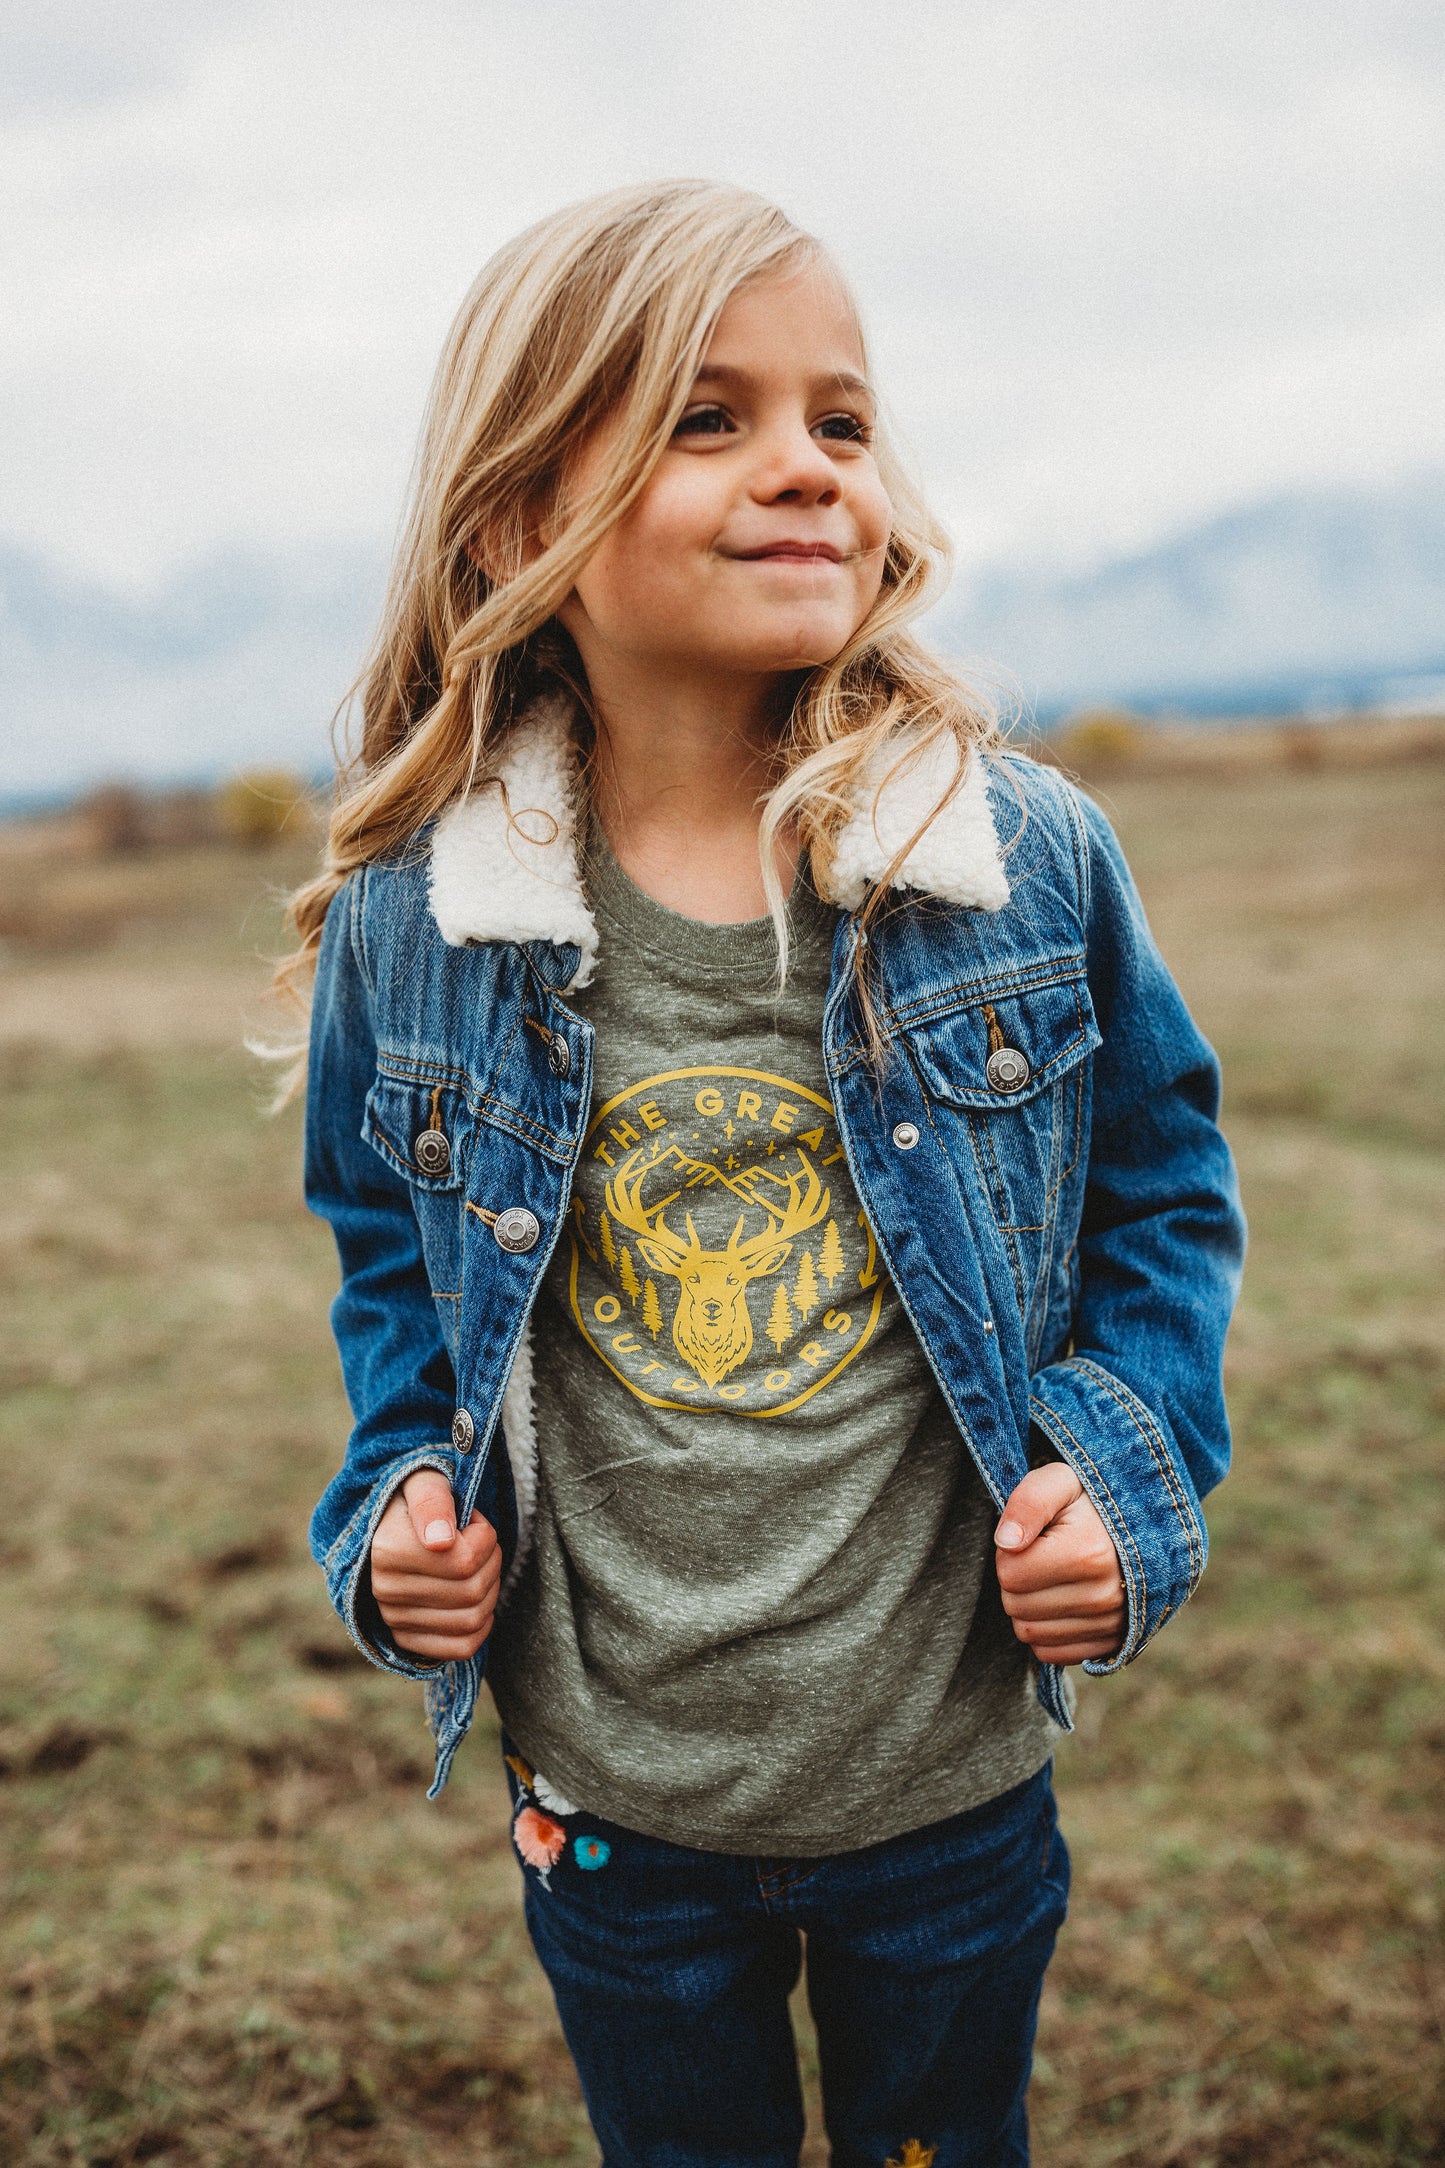 The Great Outdoors Kids Tee